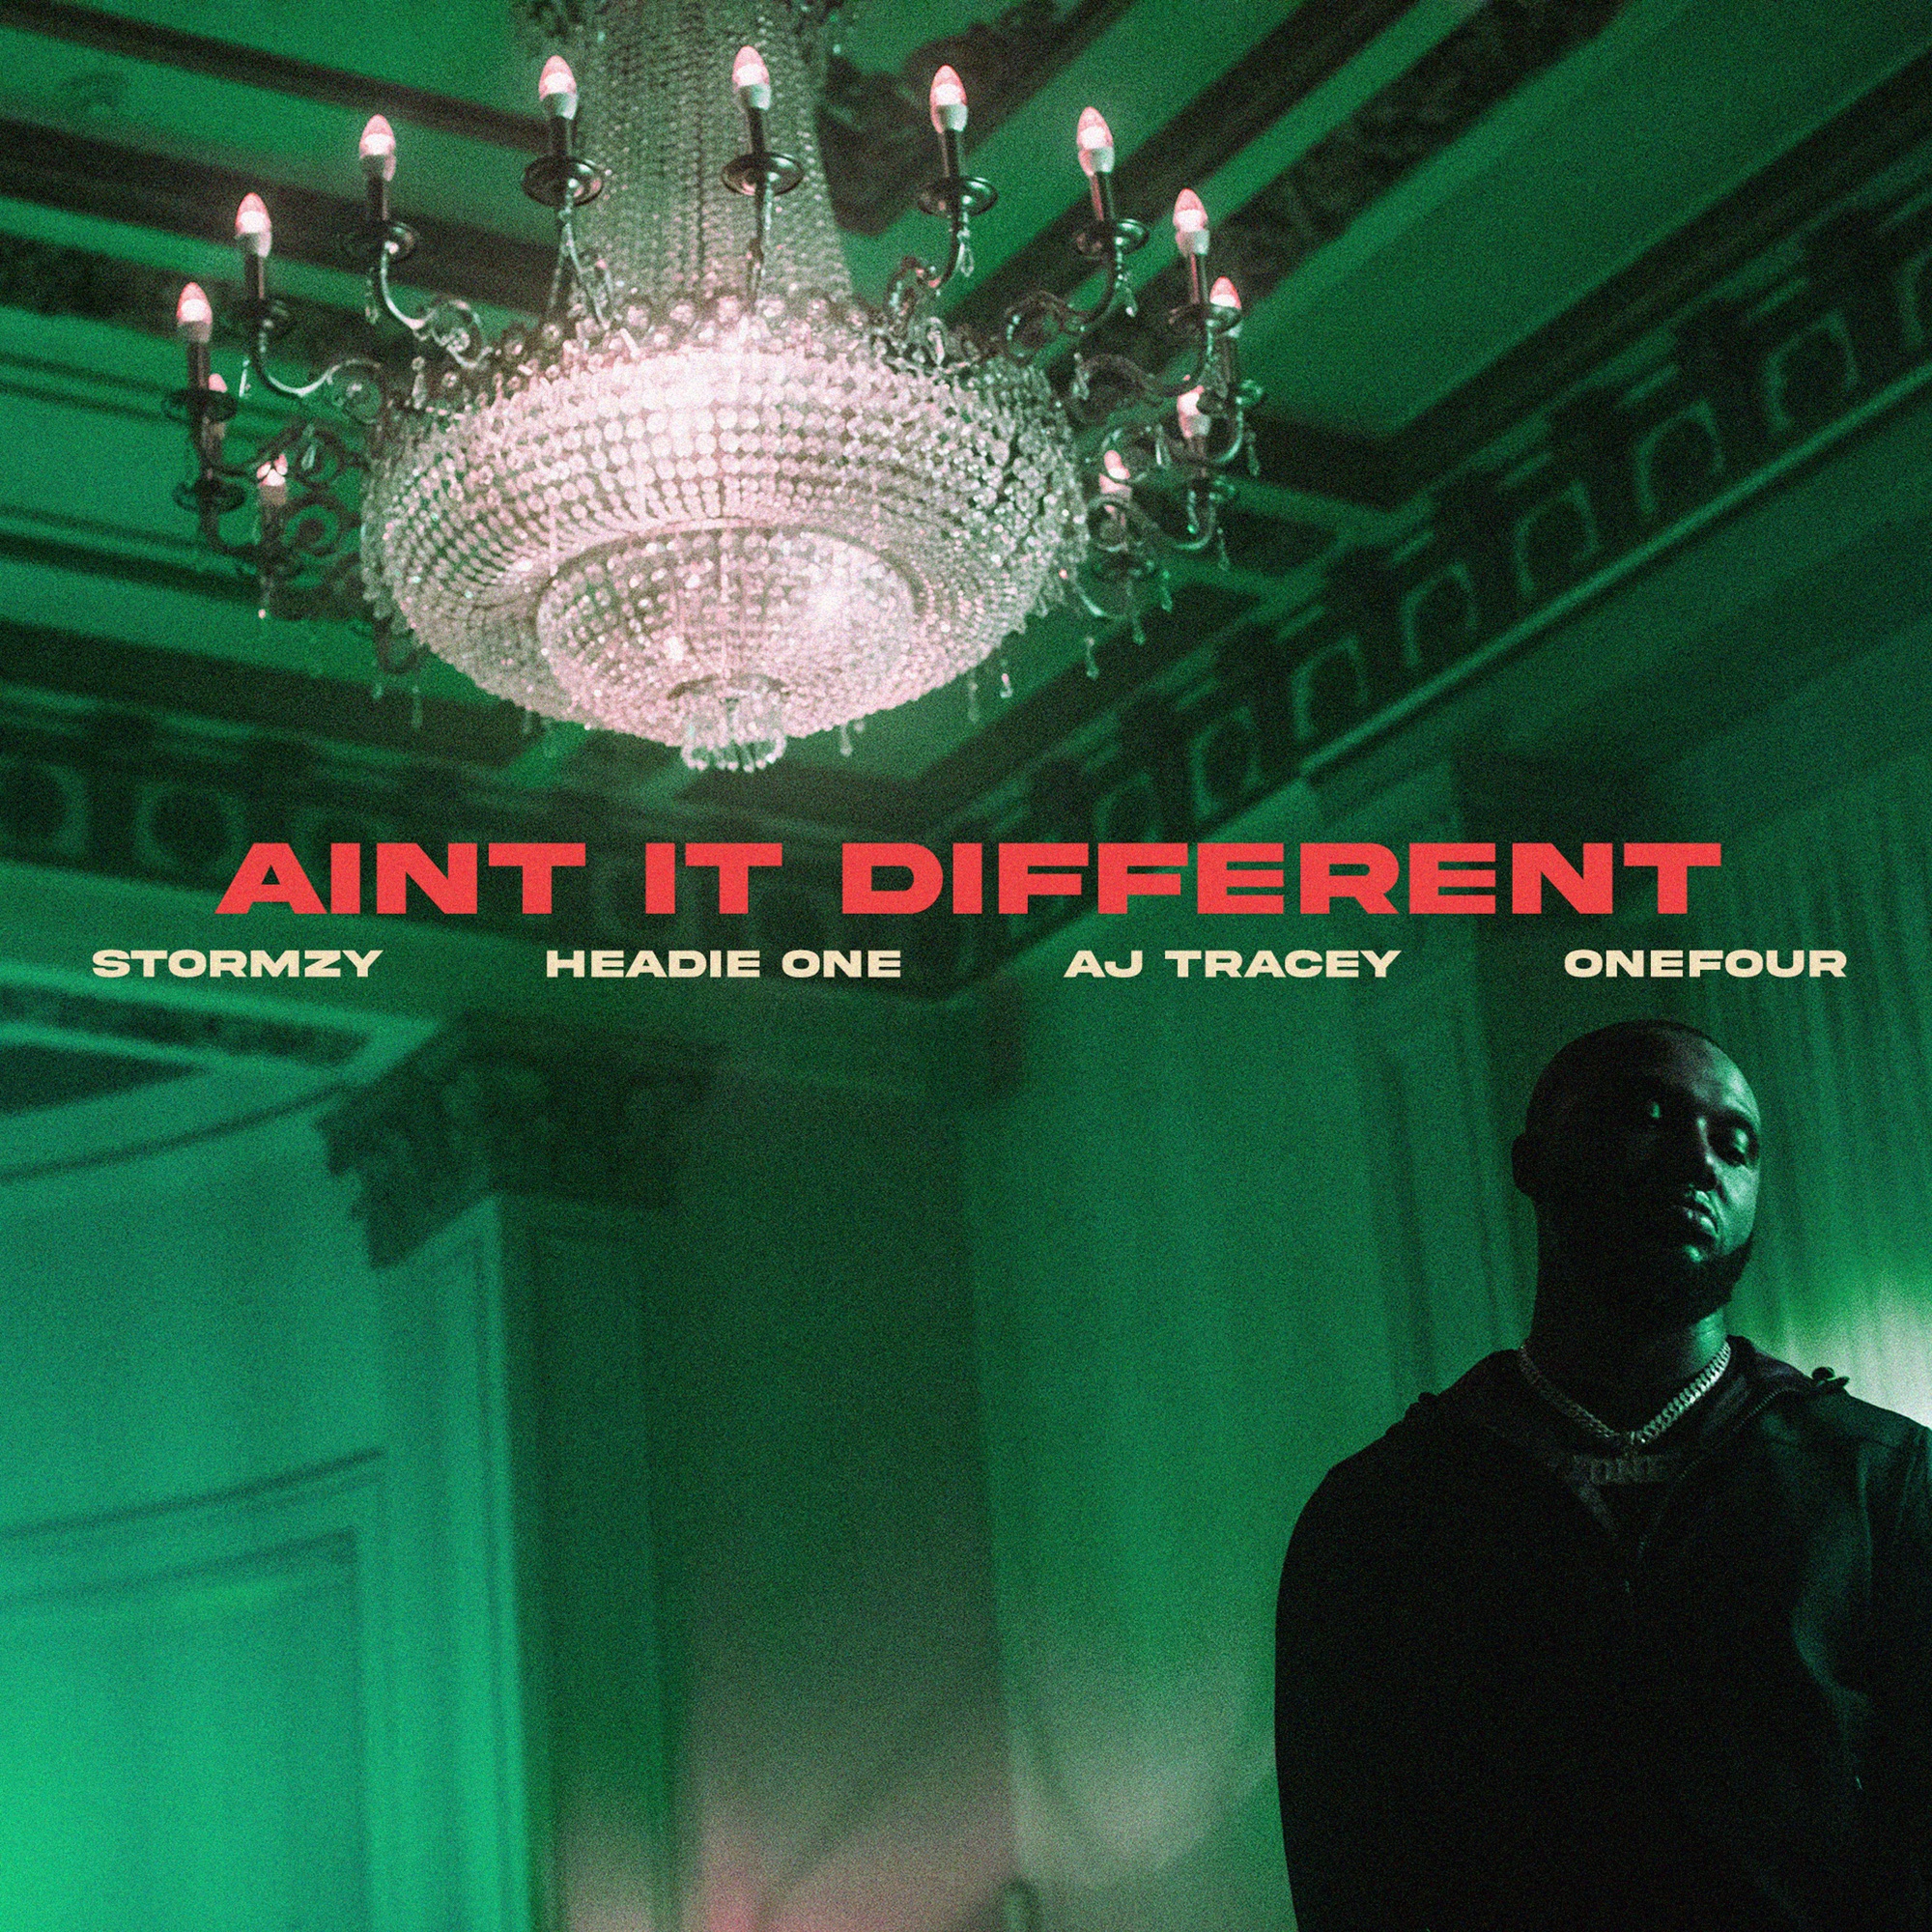 Headie One - Ain't It Different (feat. AJ Tracey, Stormzy & Onefour) - Single